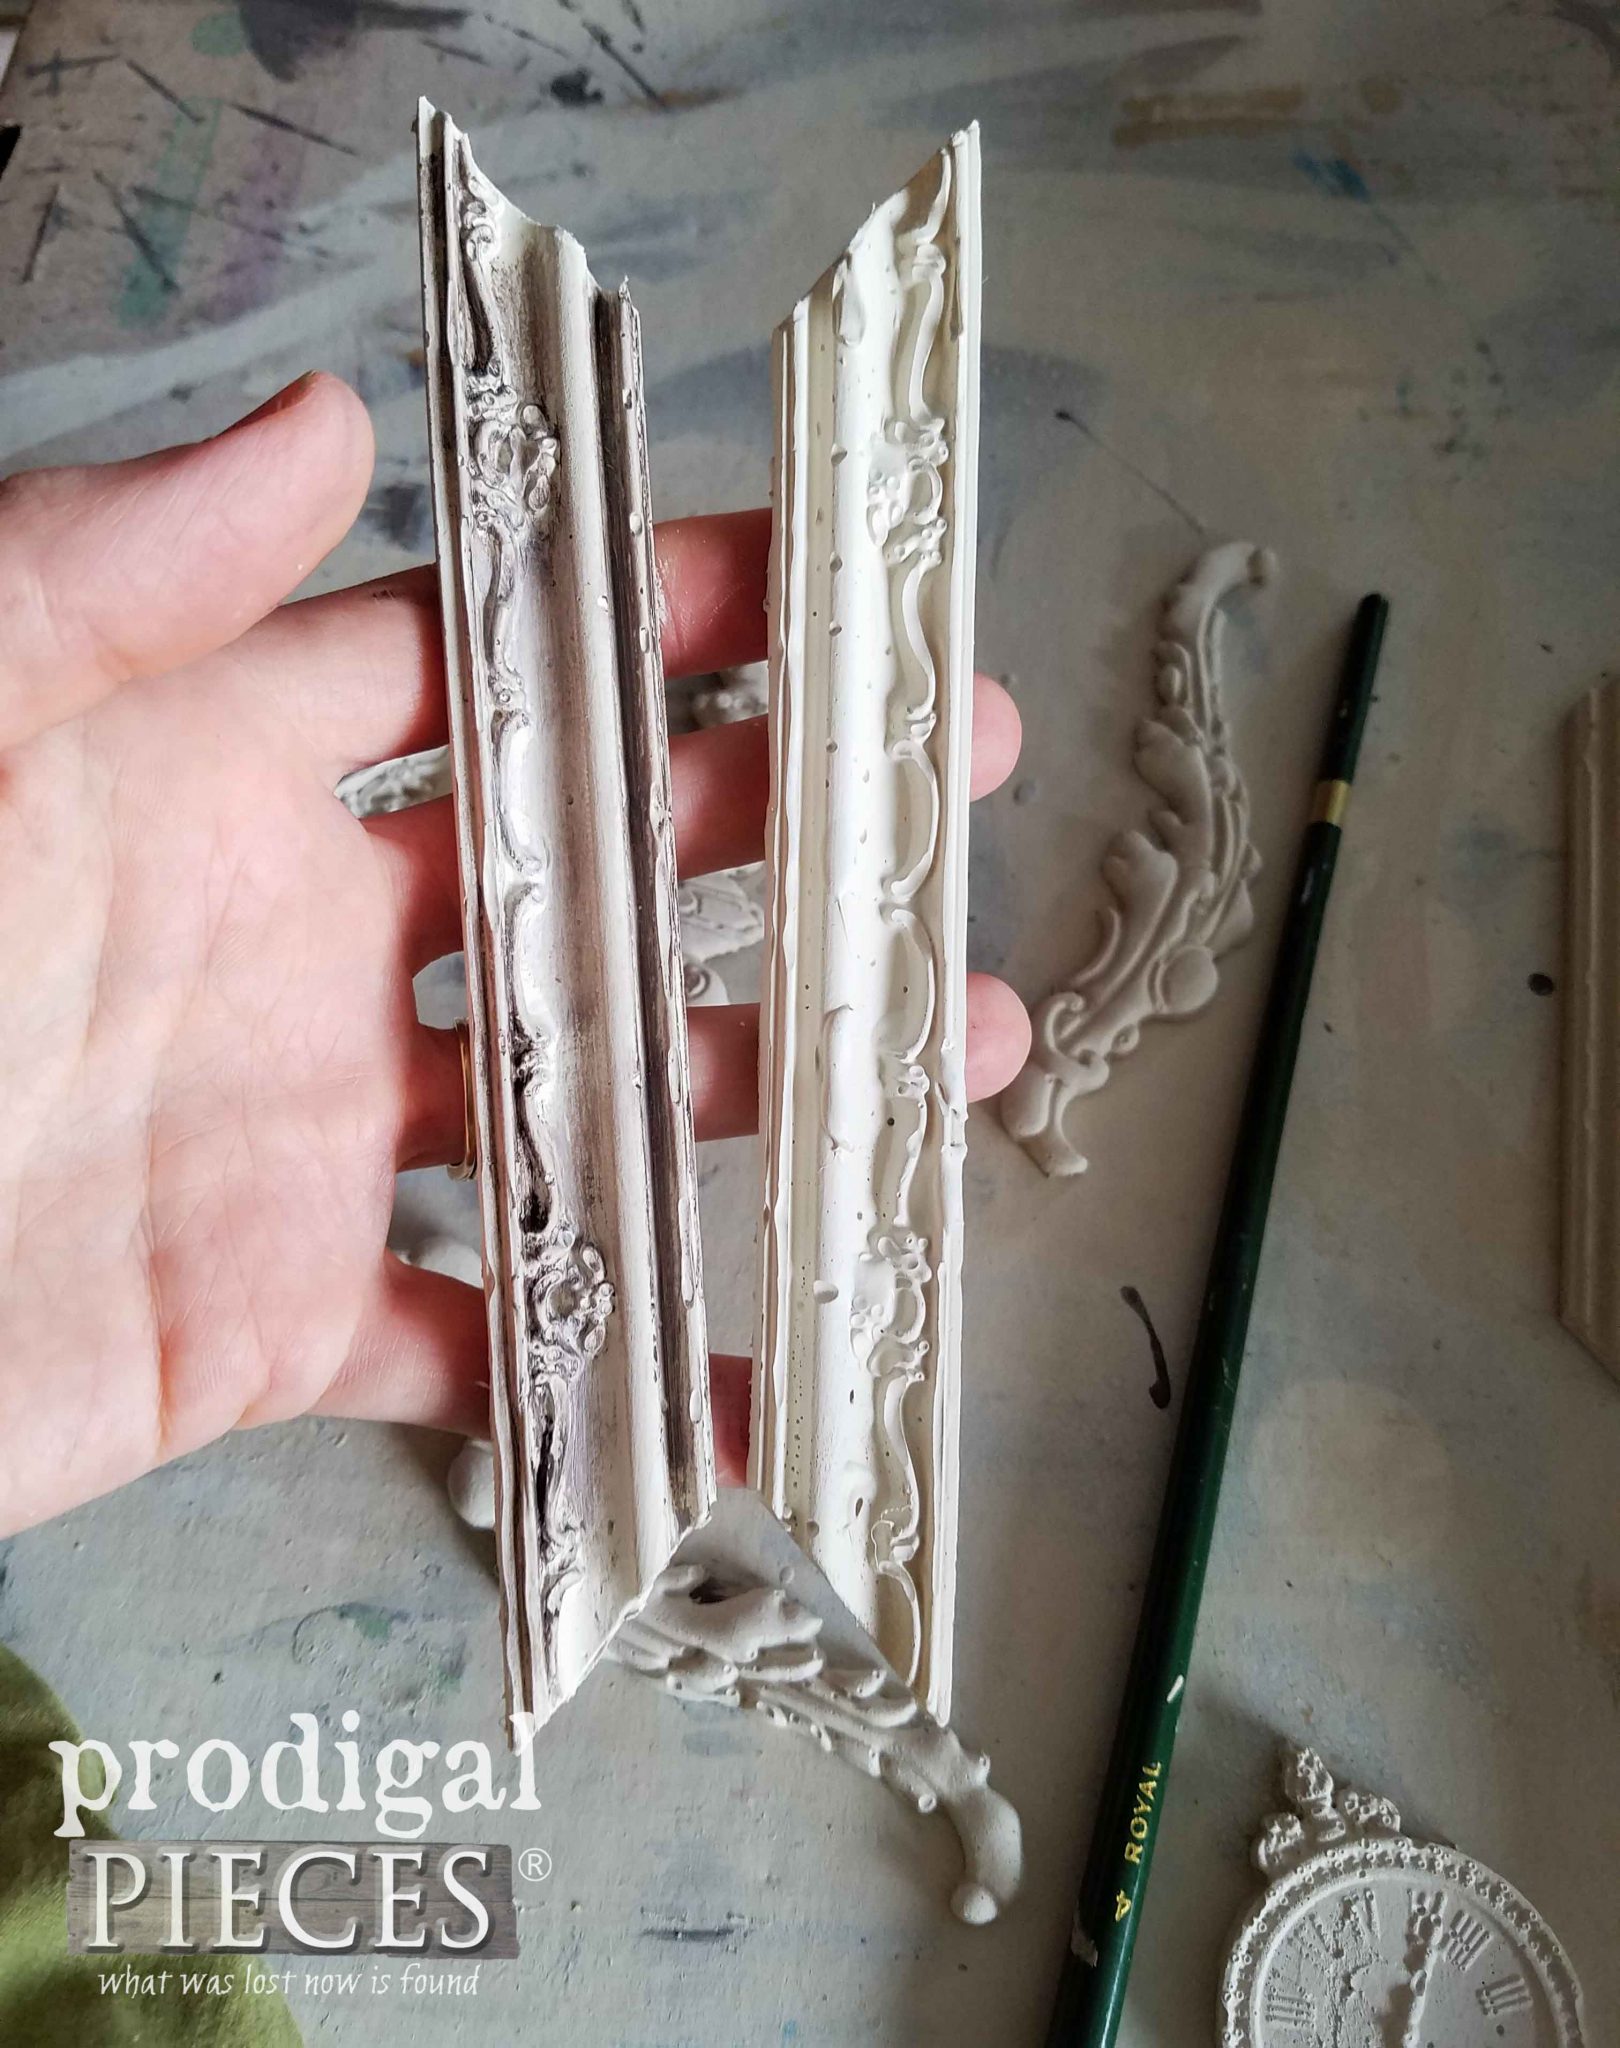 Mouldings made from Hot Glue | prodigalpieces.com